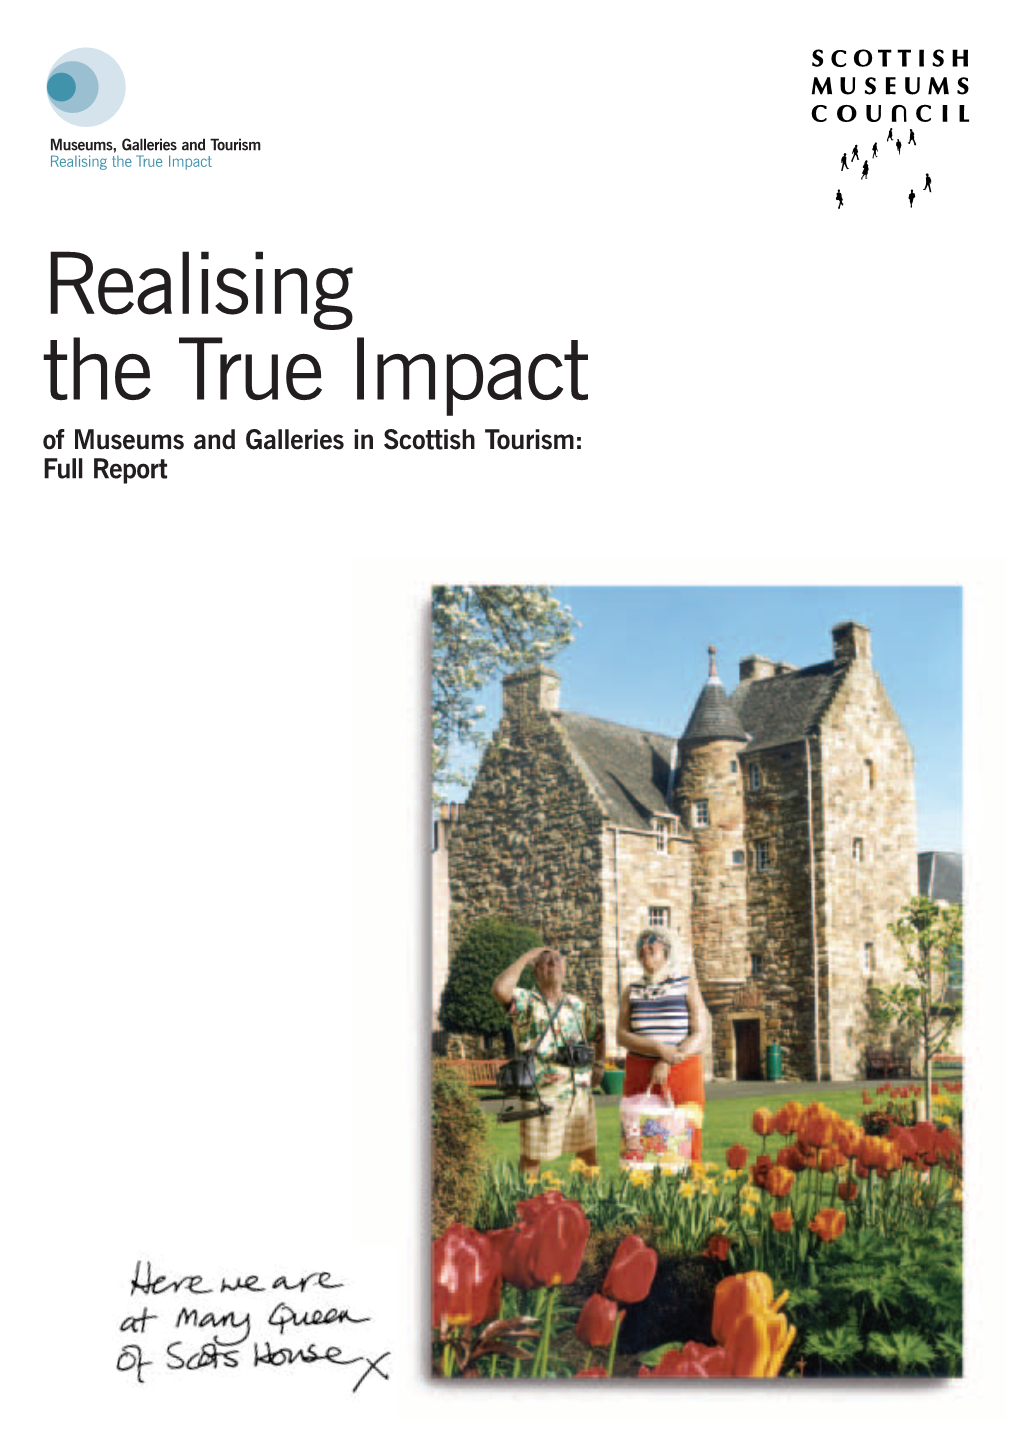 Realising the True Impact Realising the True Impact of Museums and Galleries in Scottish Tourism: Full Report